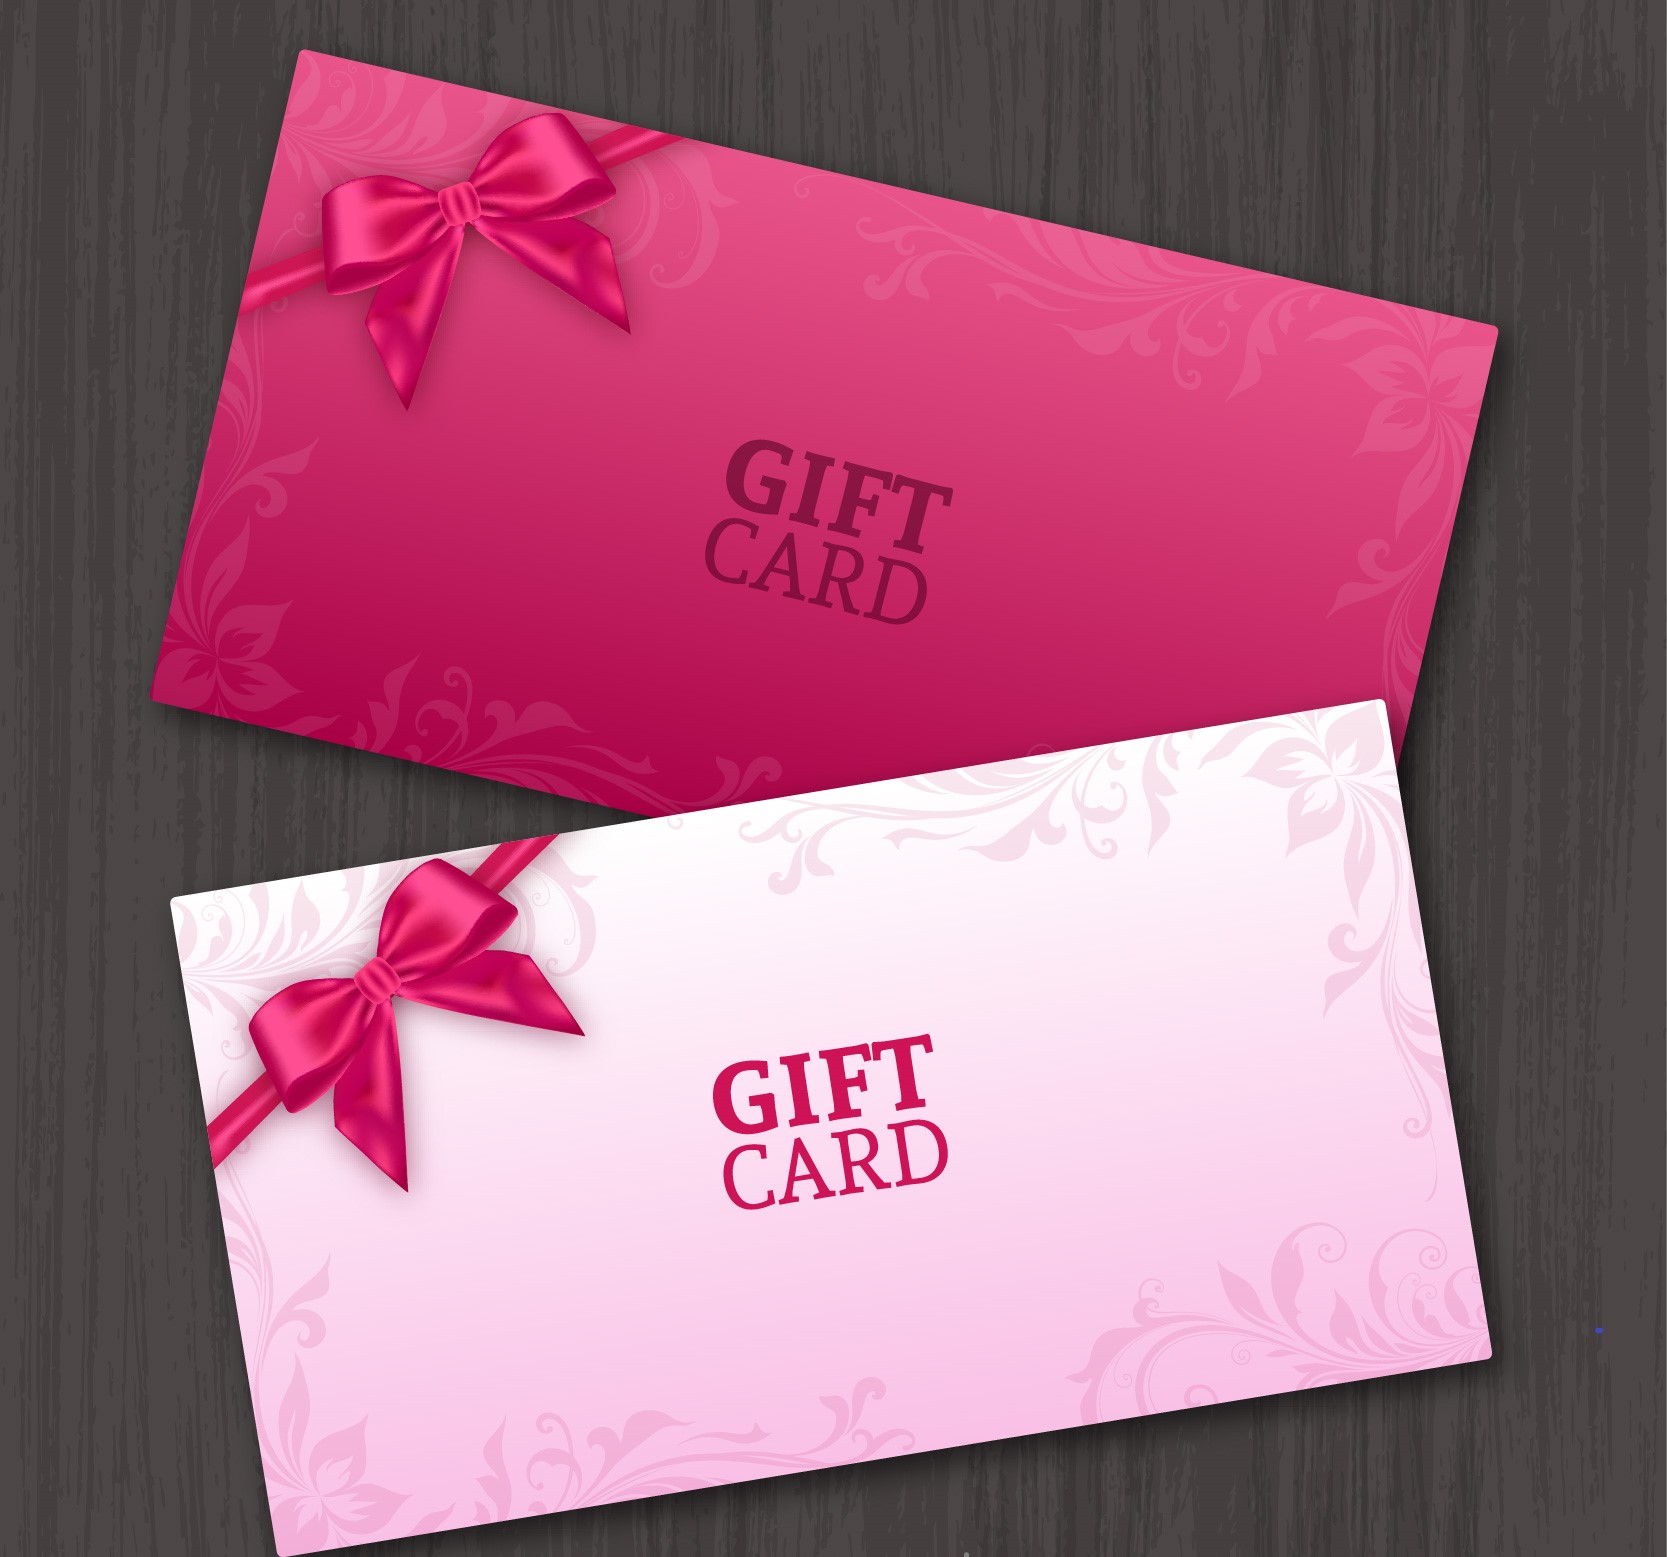 Gift Card Archives Paymentsjournal